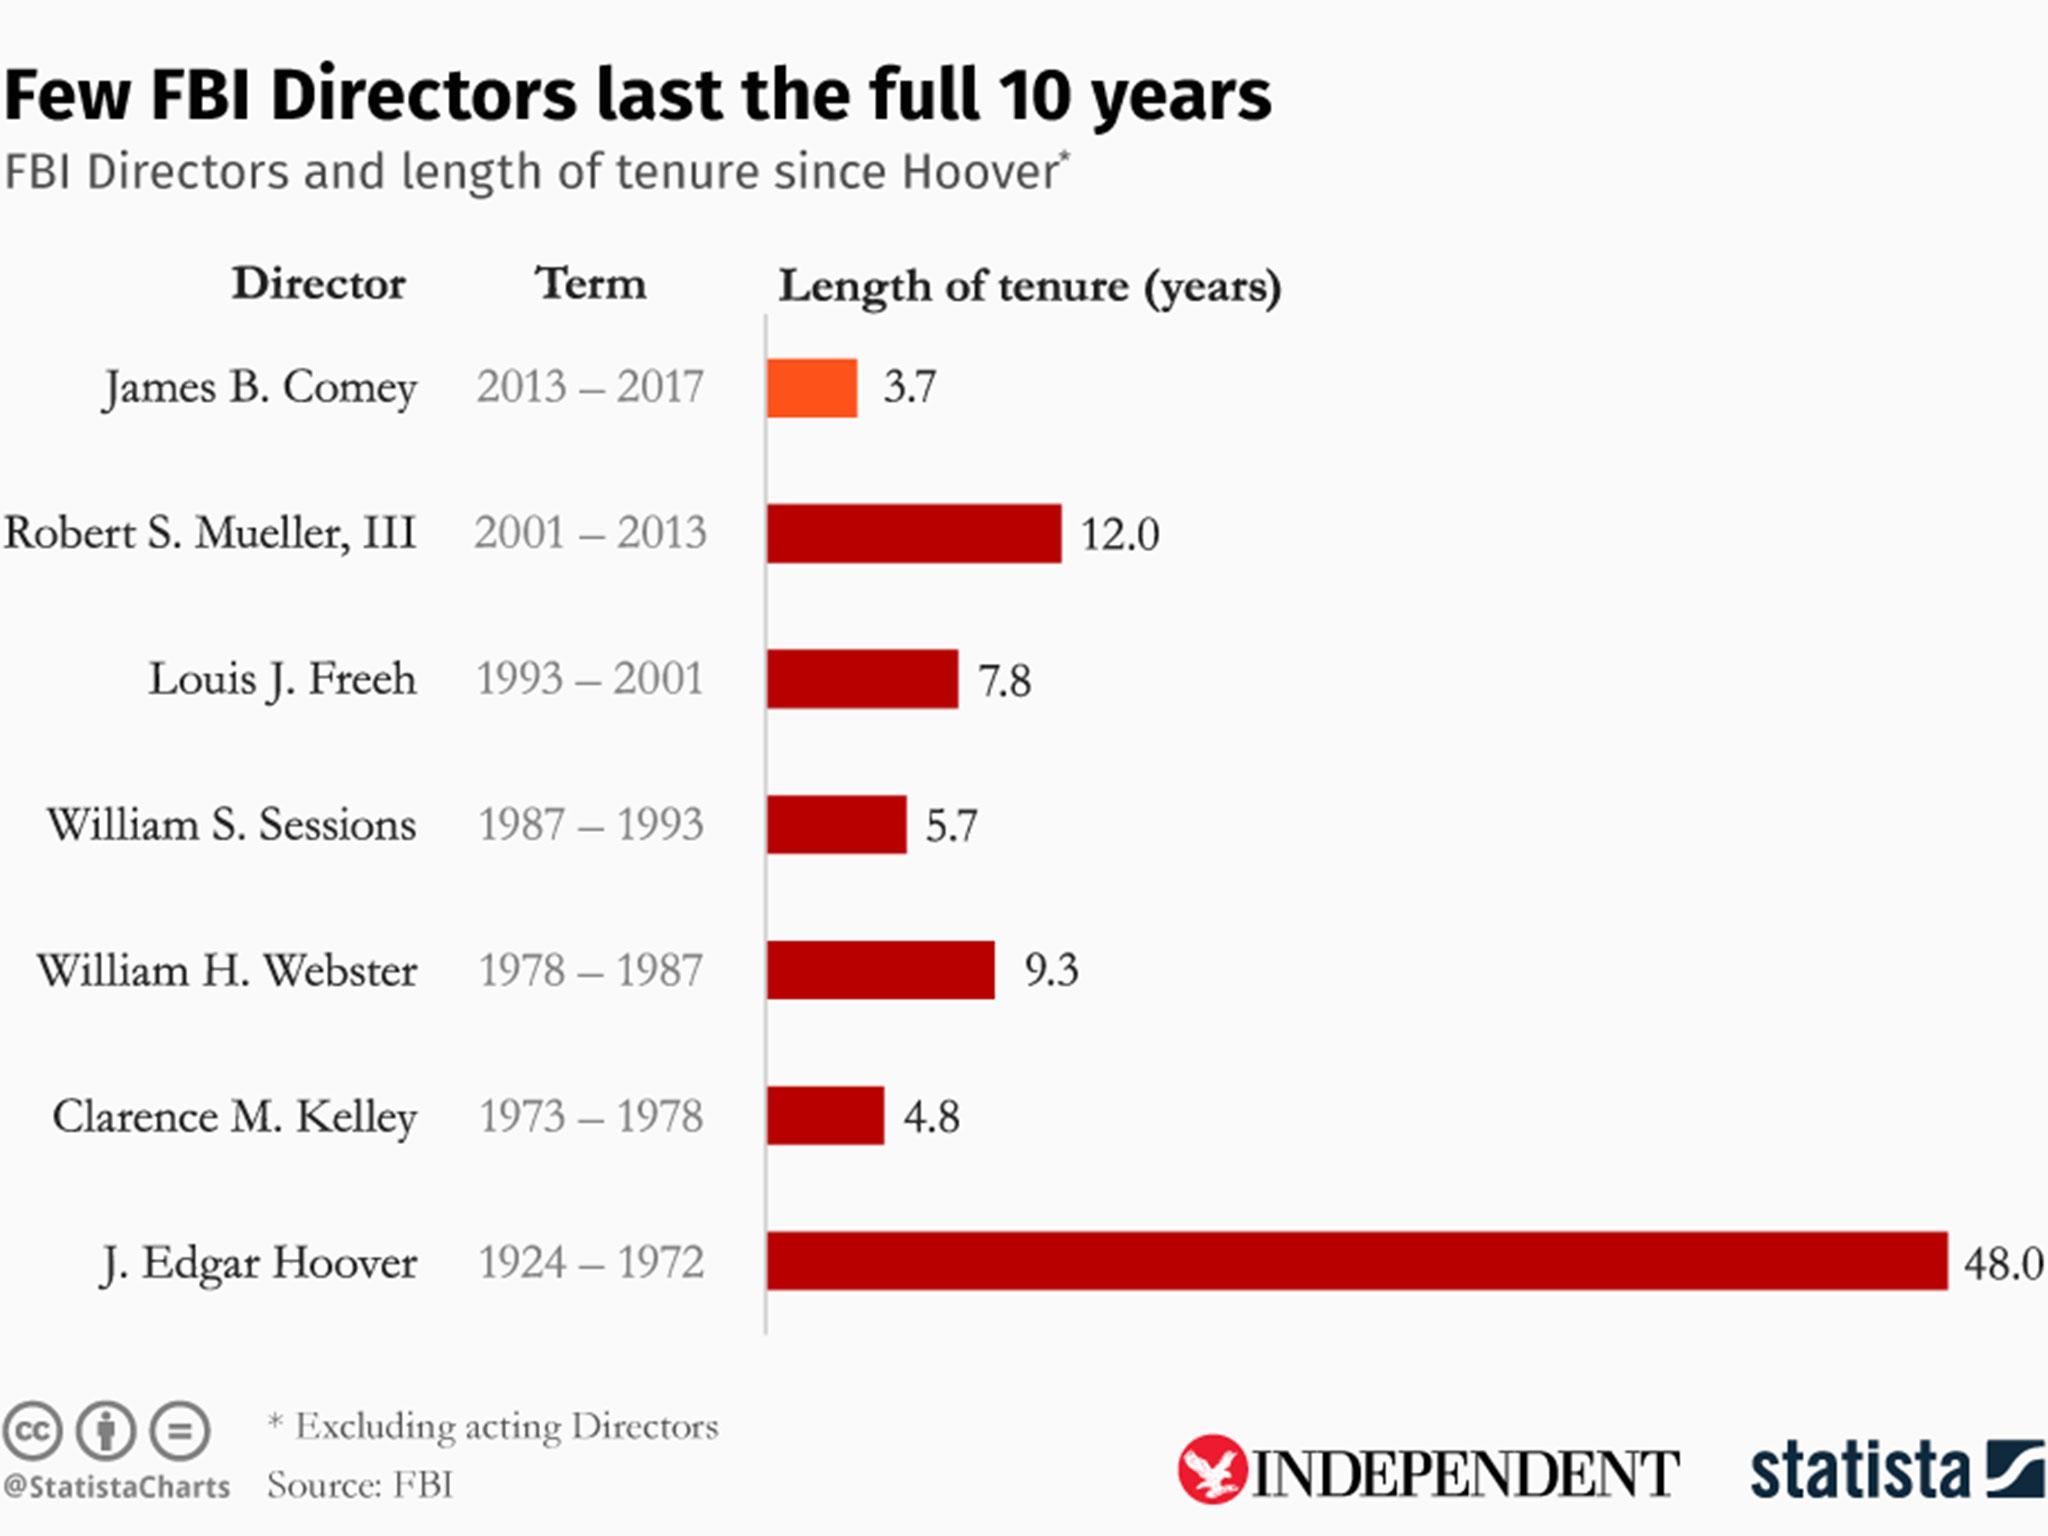 Few FBI directors have served their full 10-year term, as this chart by Statista shows